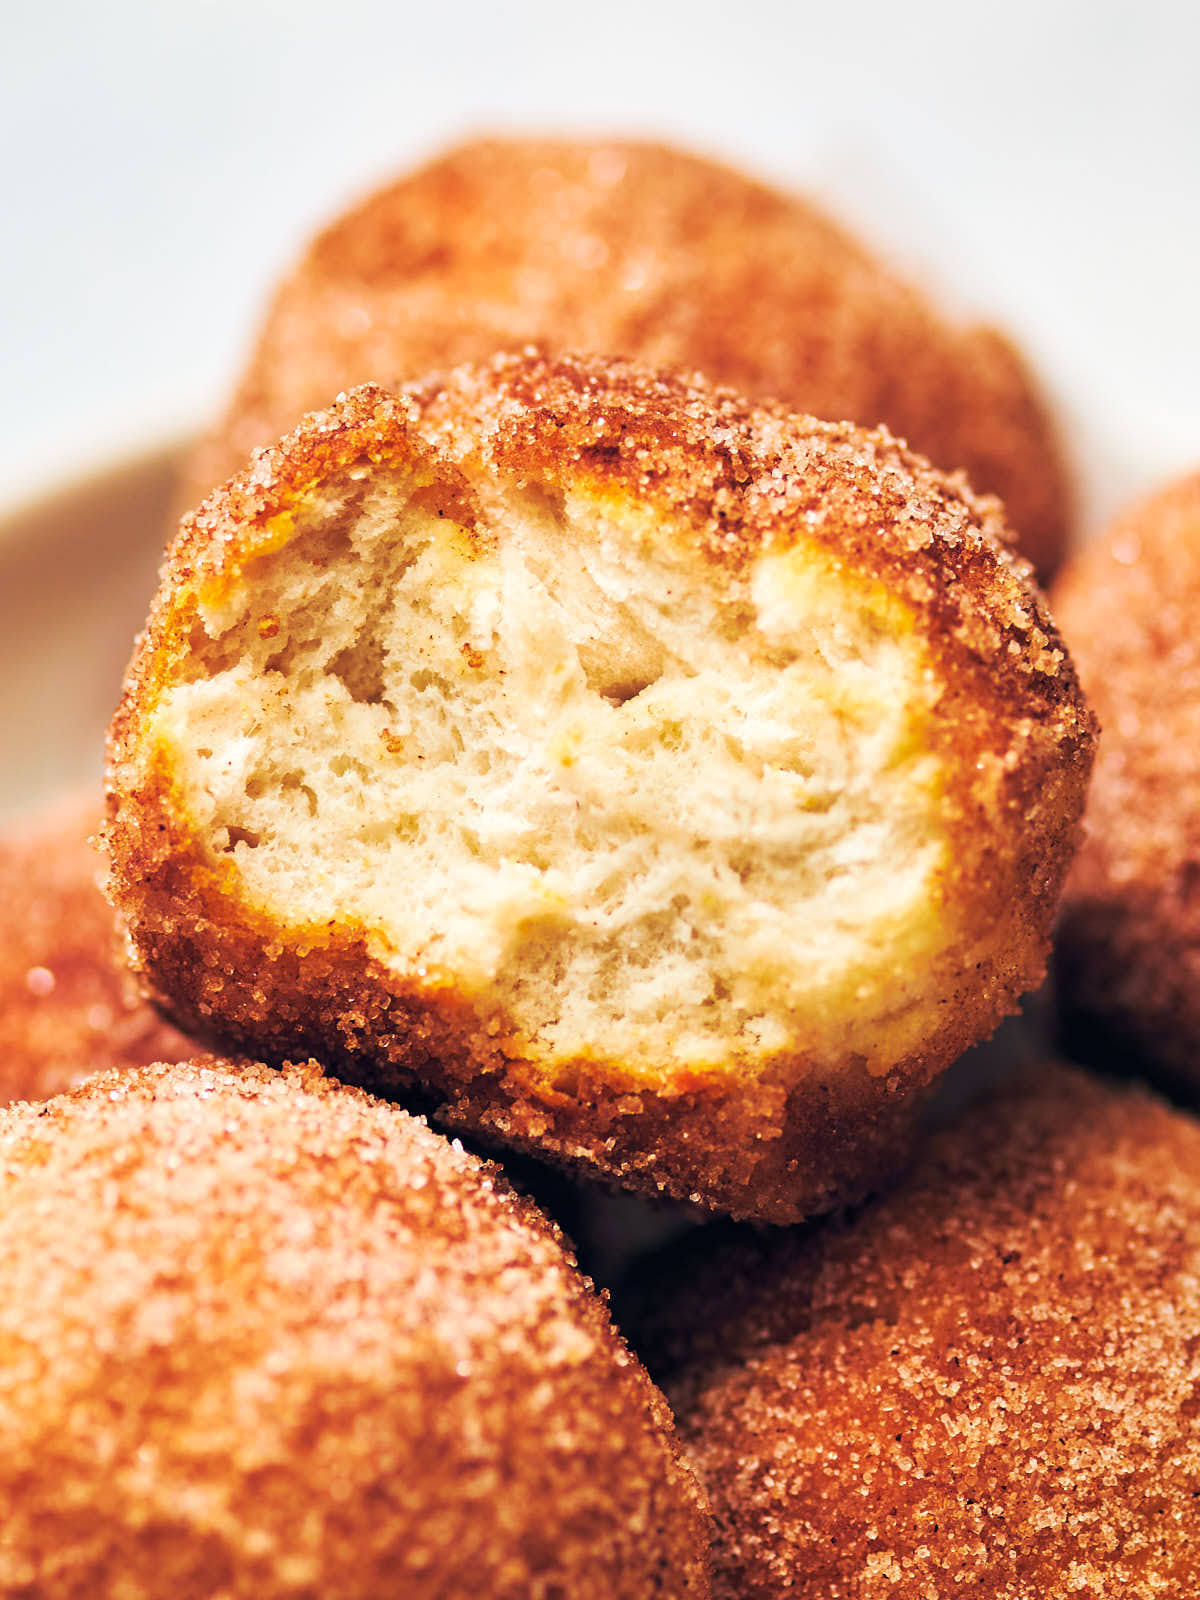 A cinnamon sugar air fryer donut hole with a bite taken out of it.